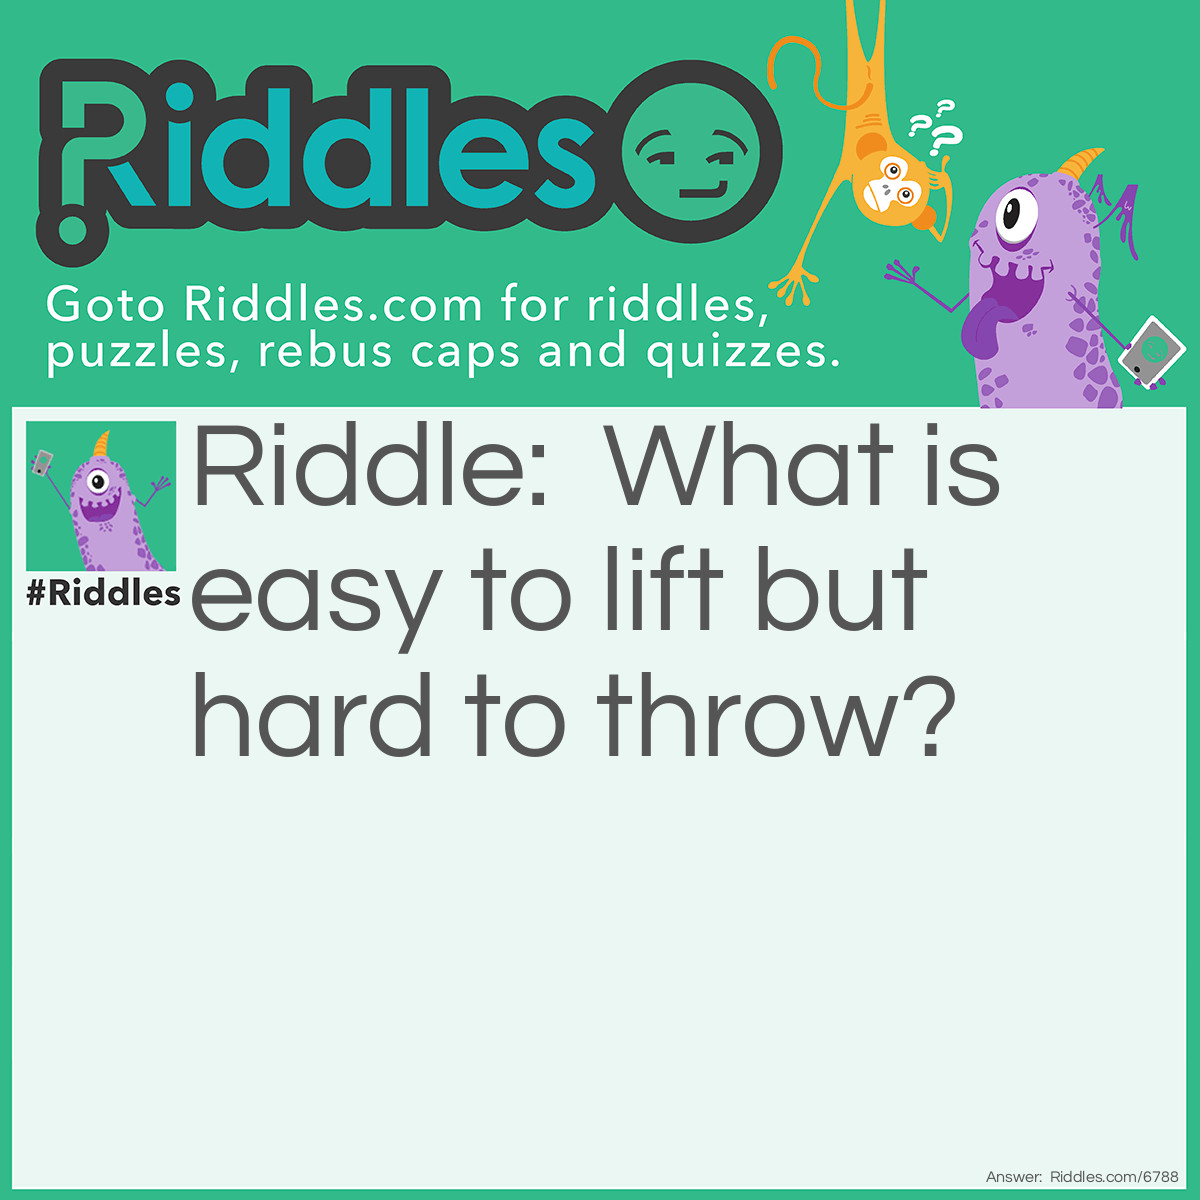 Riddle: What is easy to lift but hard to throw? Answer: A feather